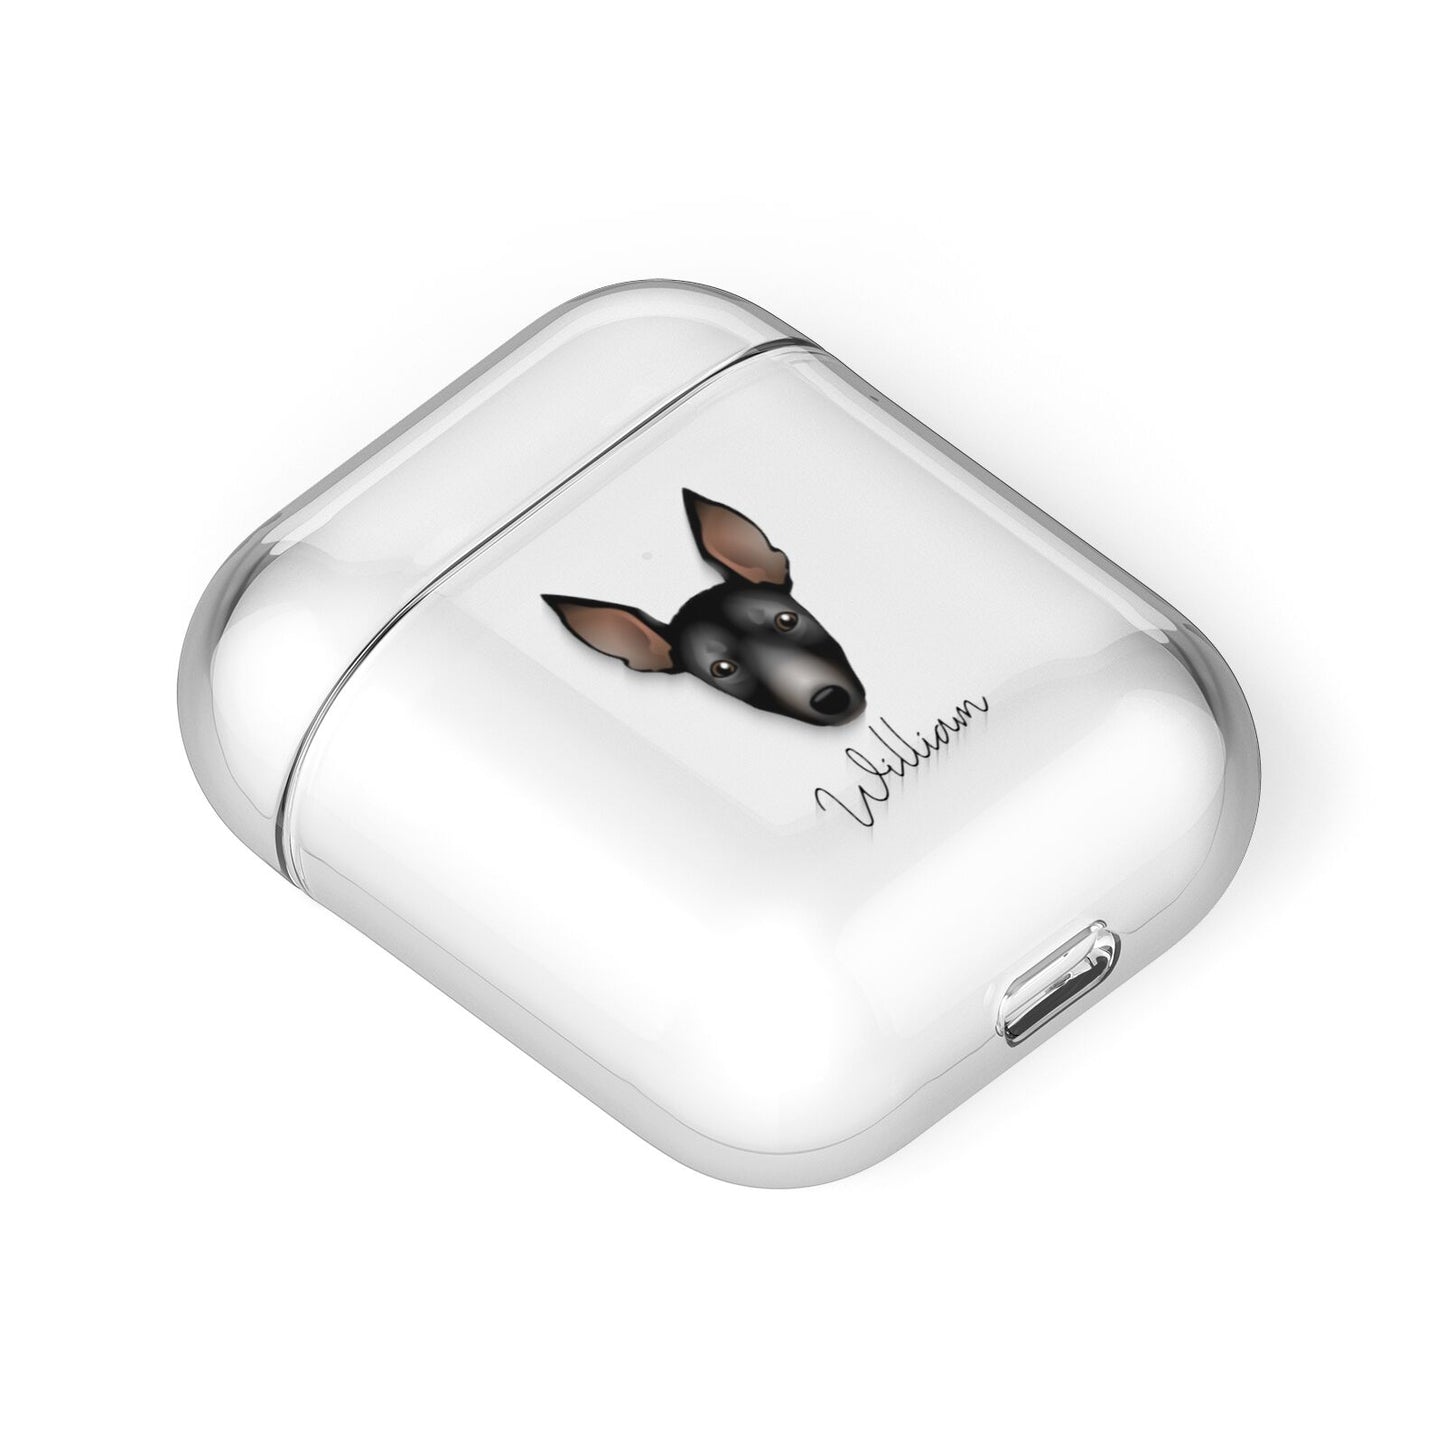 Manchester Terrier Personalised AirPods Case Laid Flat